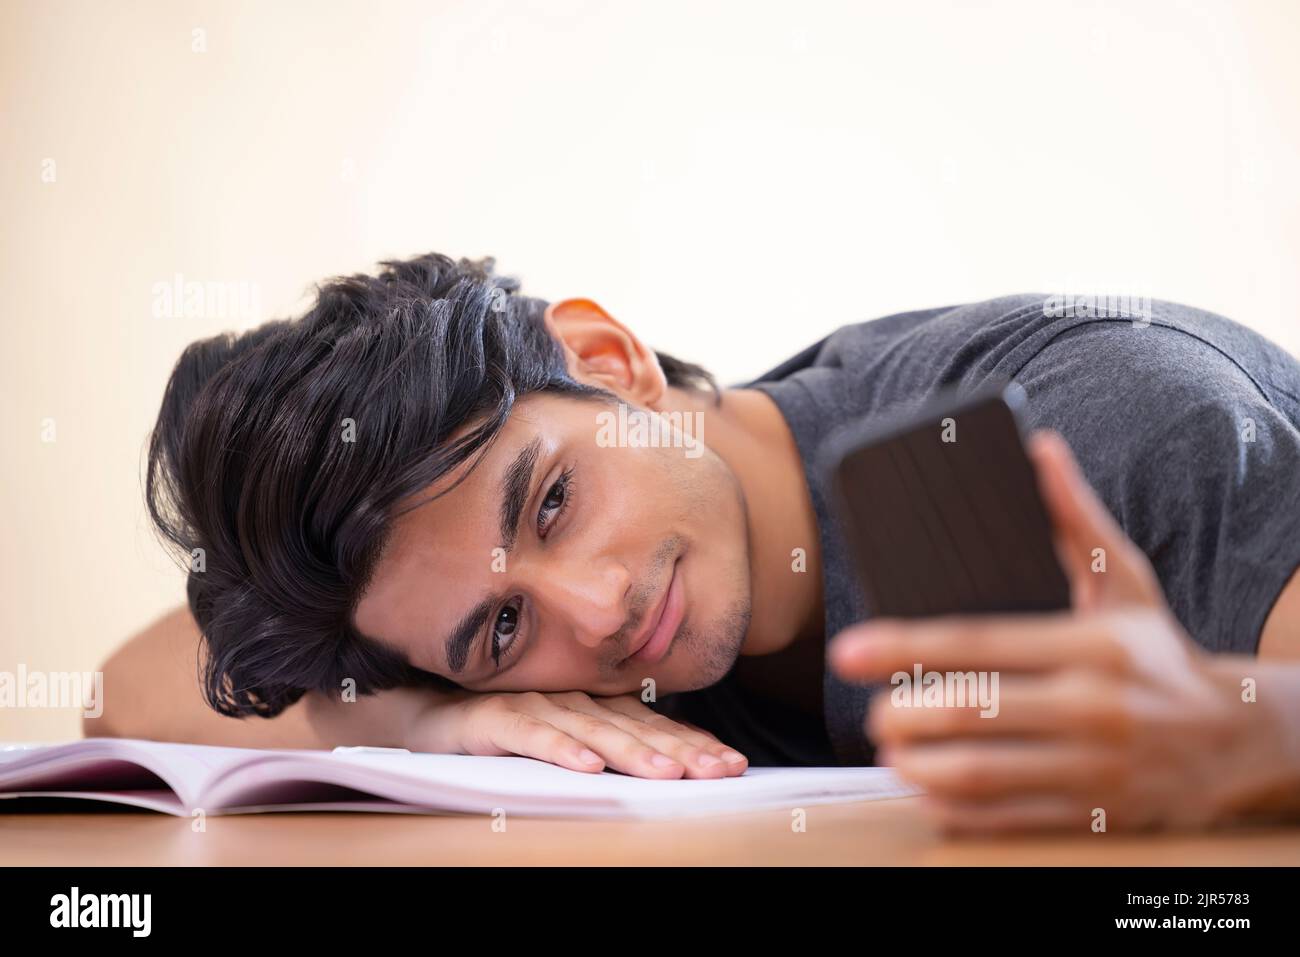 Close-up portrait of a tired teenager leaning head on hand with holding a smartphone Stock Photo